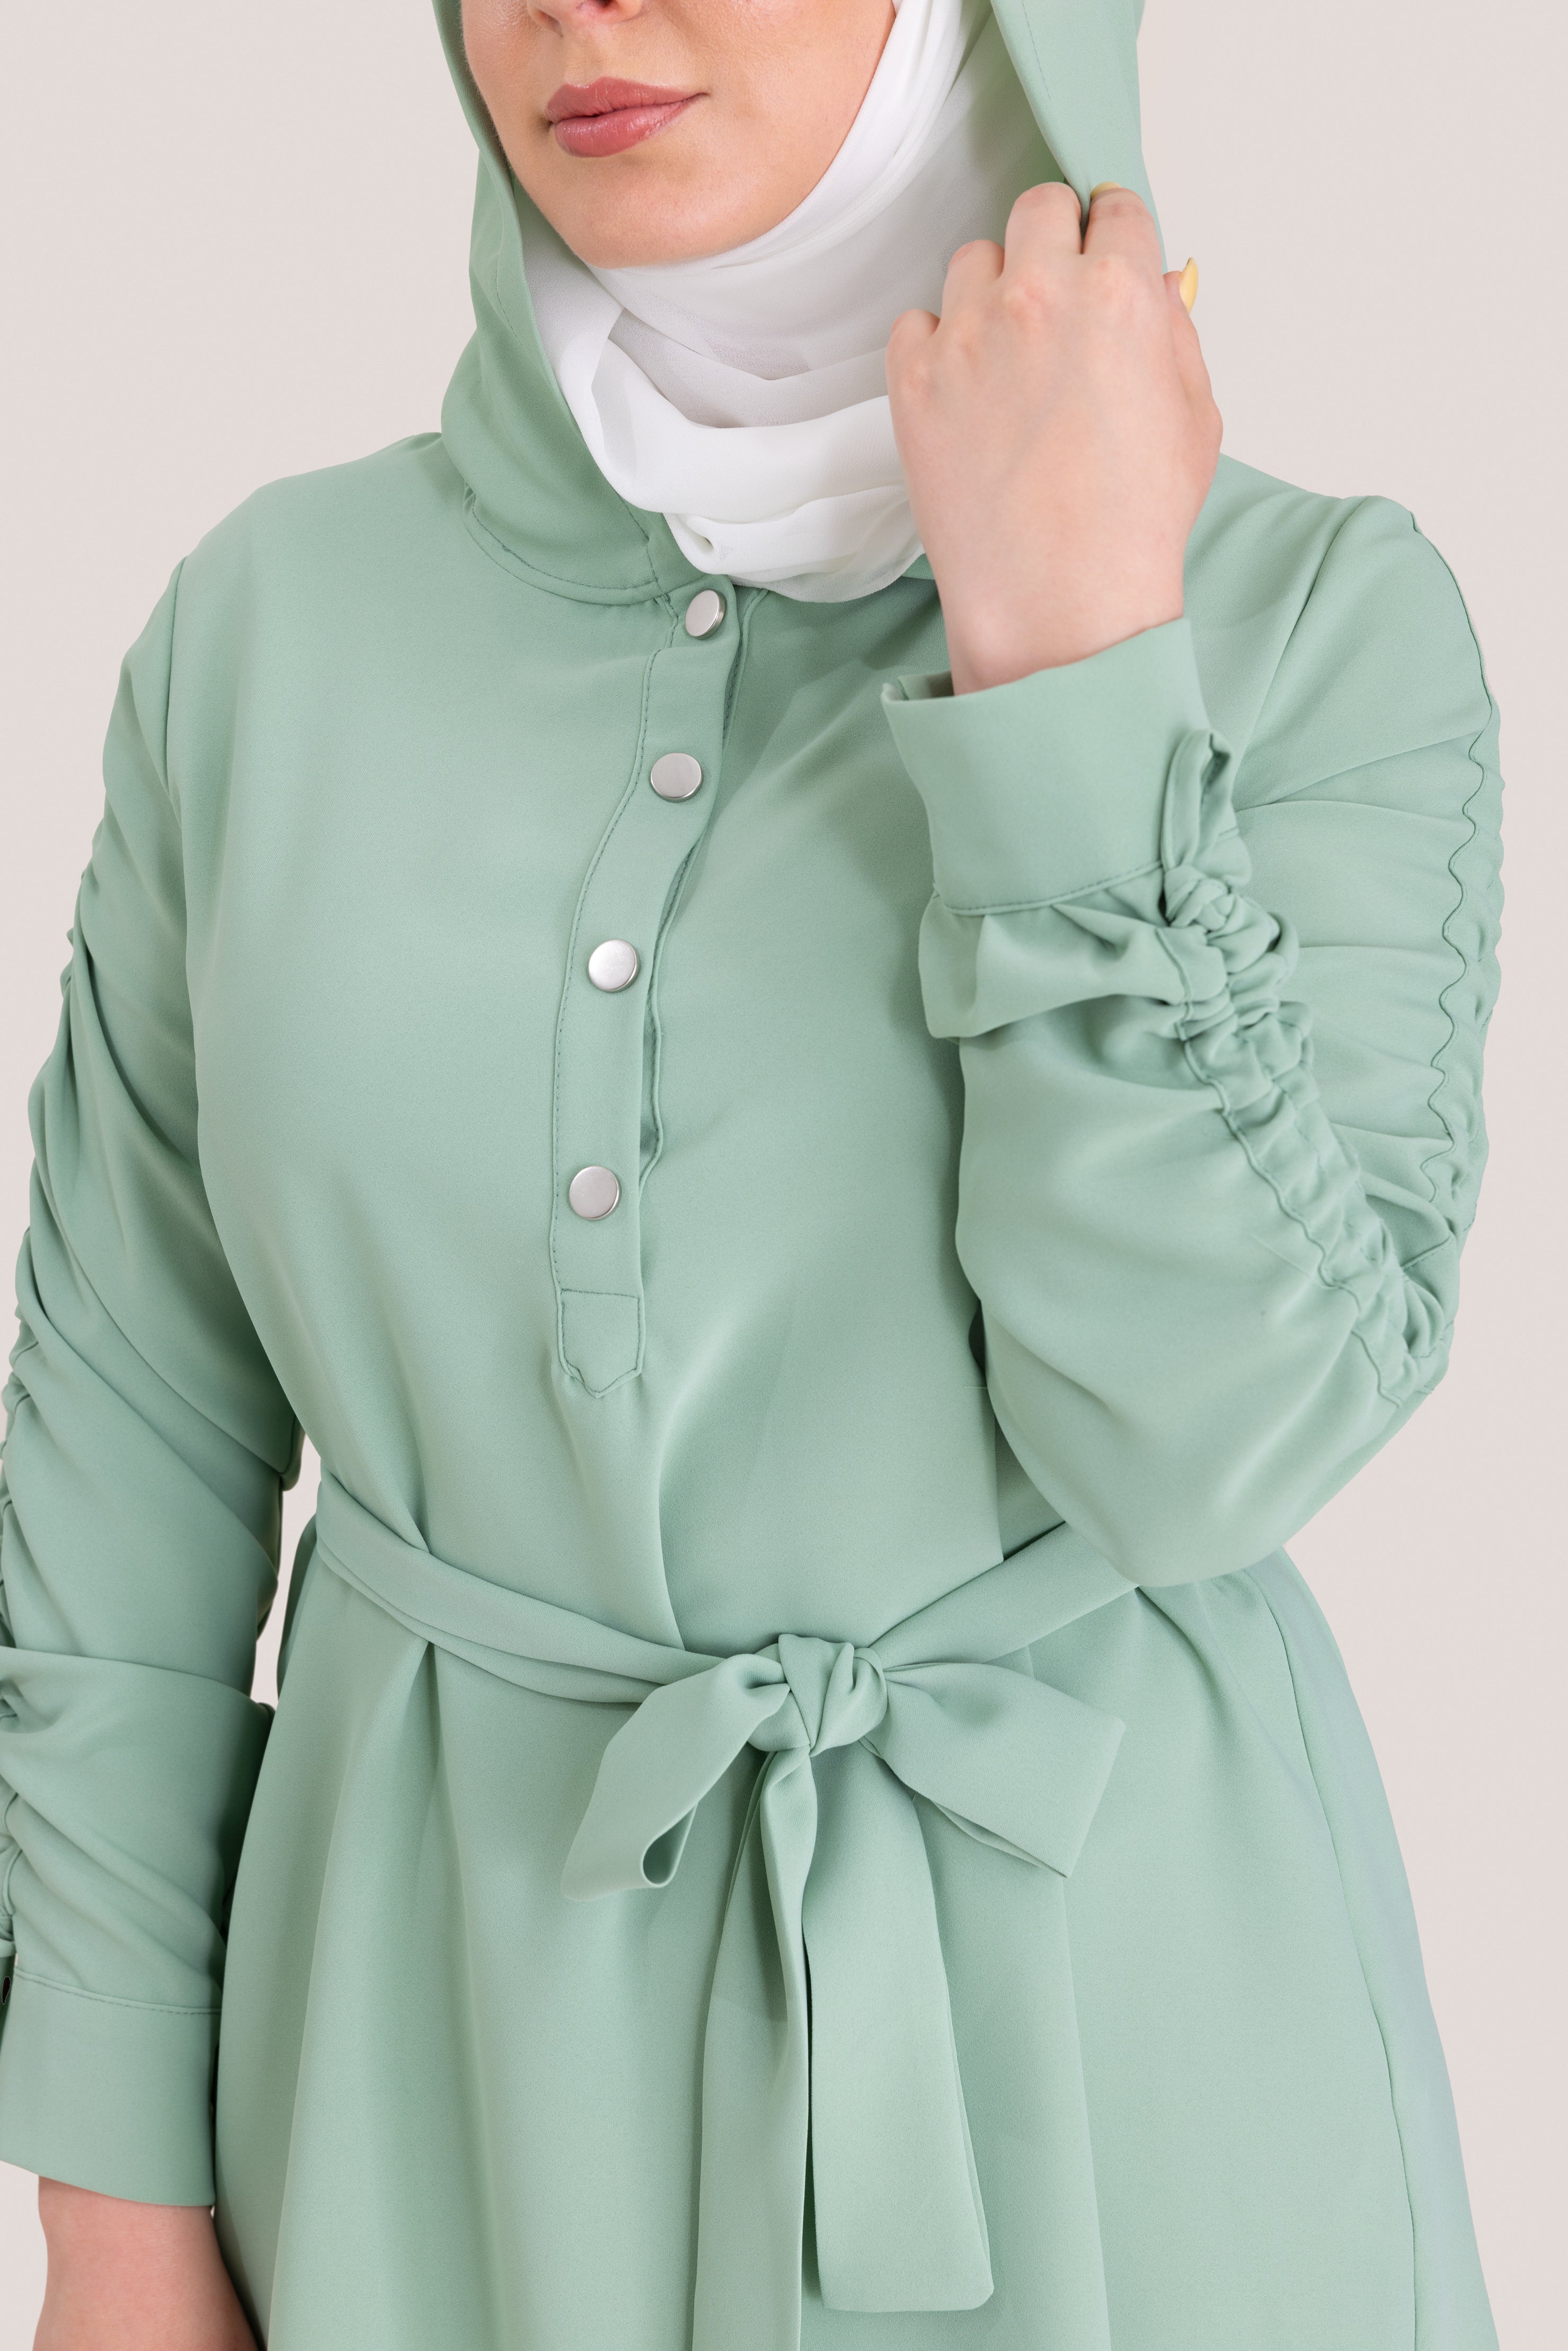 Pull-up Sleeve Matching Set - Mint Green